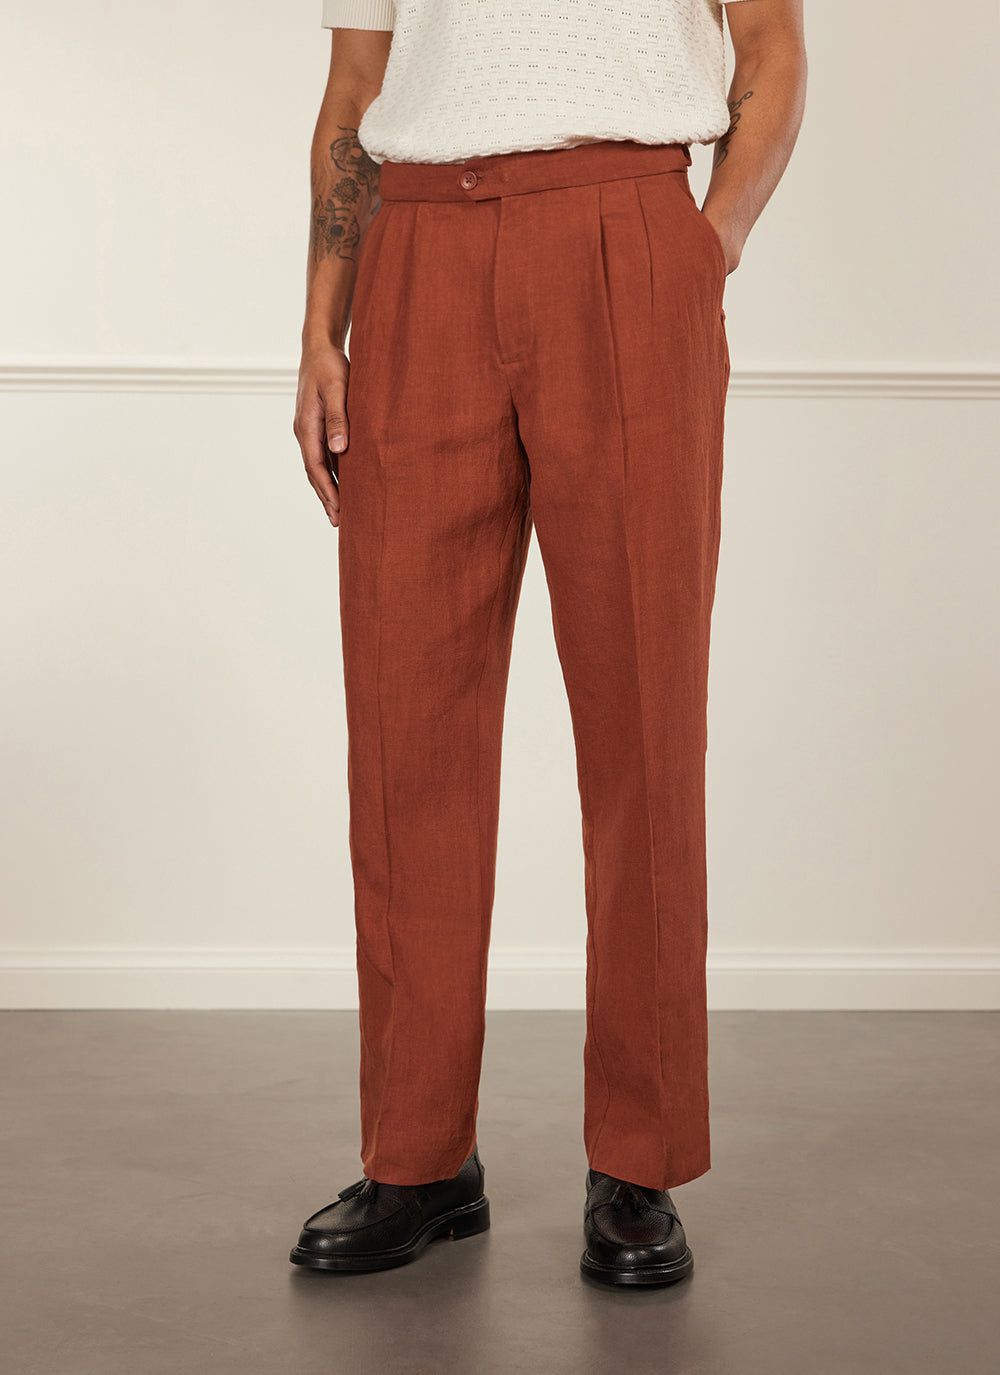 COS High Waisted Pleated Trousers in Natural | Lyst